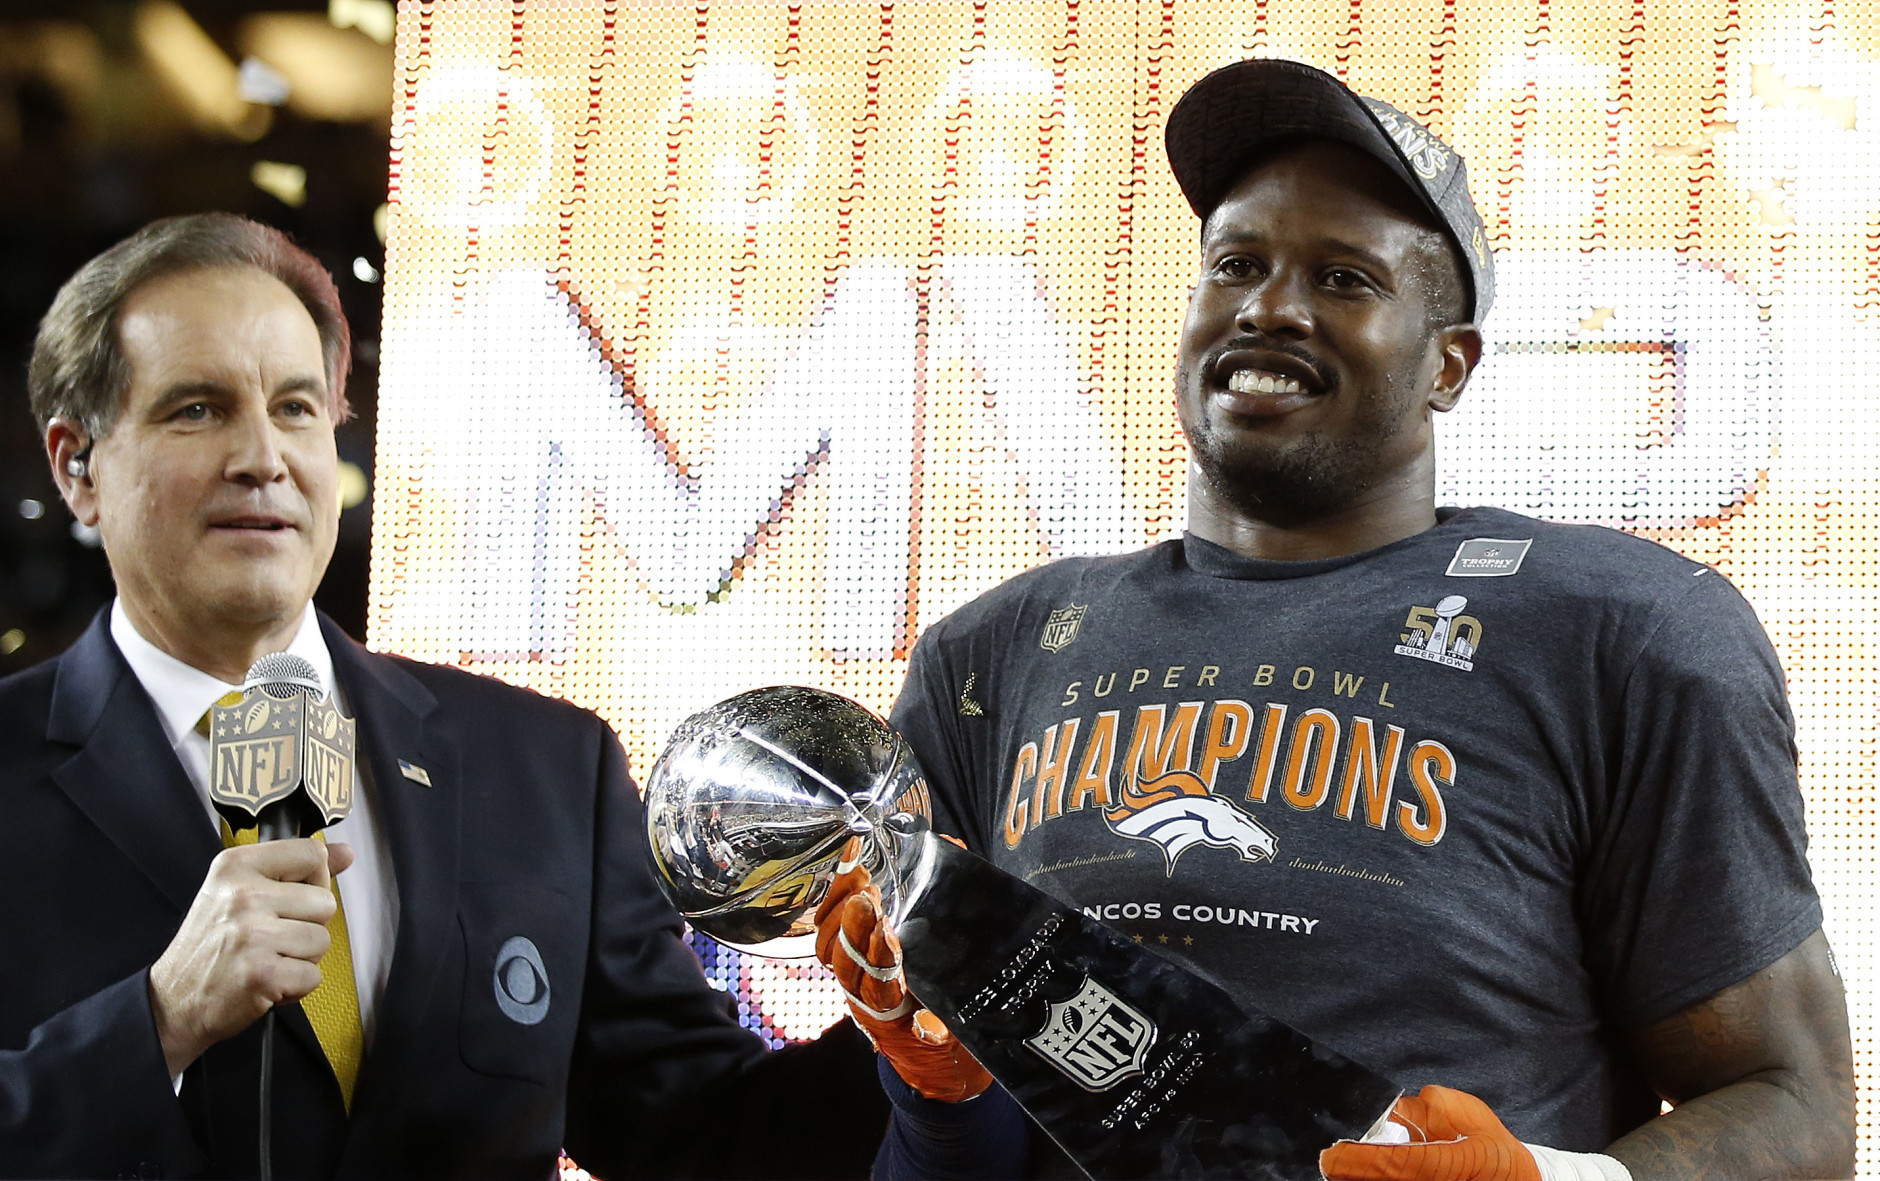 SANTA CLARA, CA - FEBRUARY 07:  Super Bowl MVP   Von Miller #58 of the Denver Broncos celebrates with the Vince Lombardi Trophy after winning Super Bowl 50 at Levi's Stadium on February 7, 2016 in Santa Clara, California.  The Broncos defeated the Panthers 24-10.  (Photo by Ezra Shaw/Getty Images)